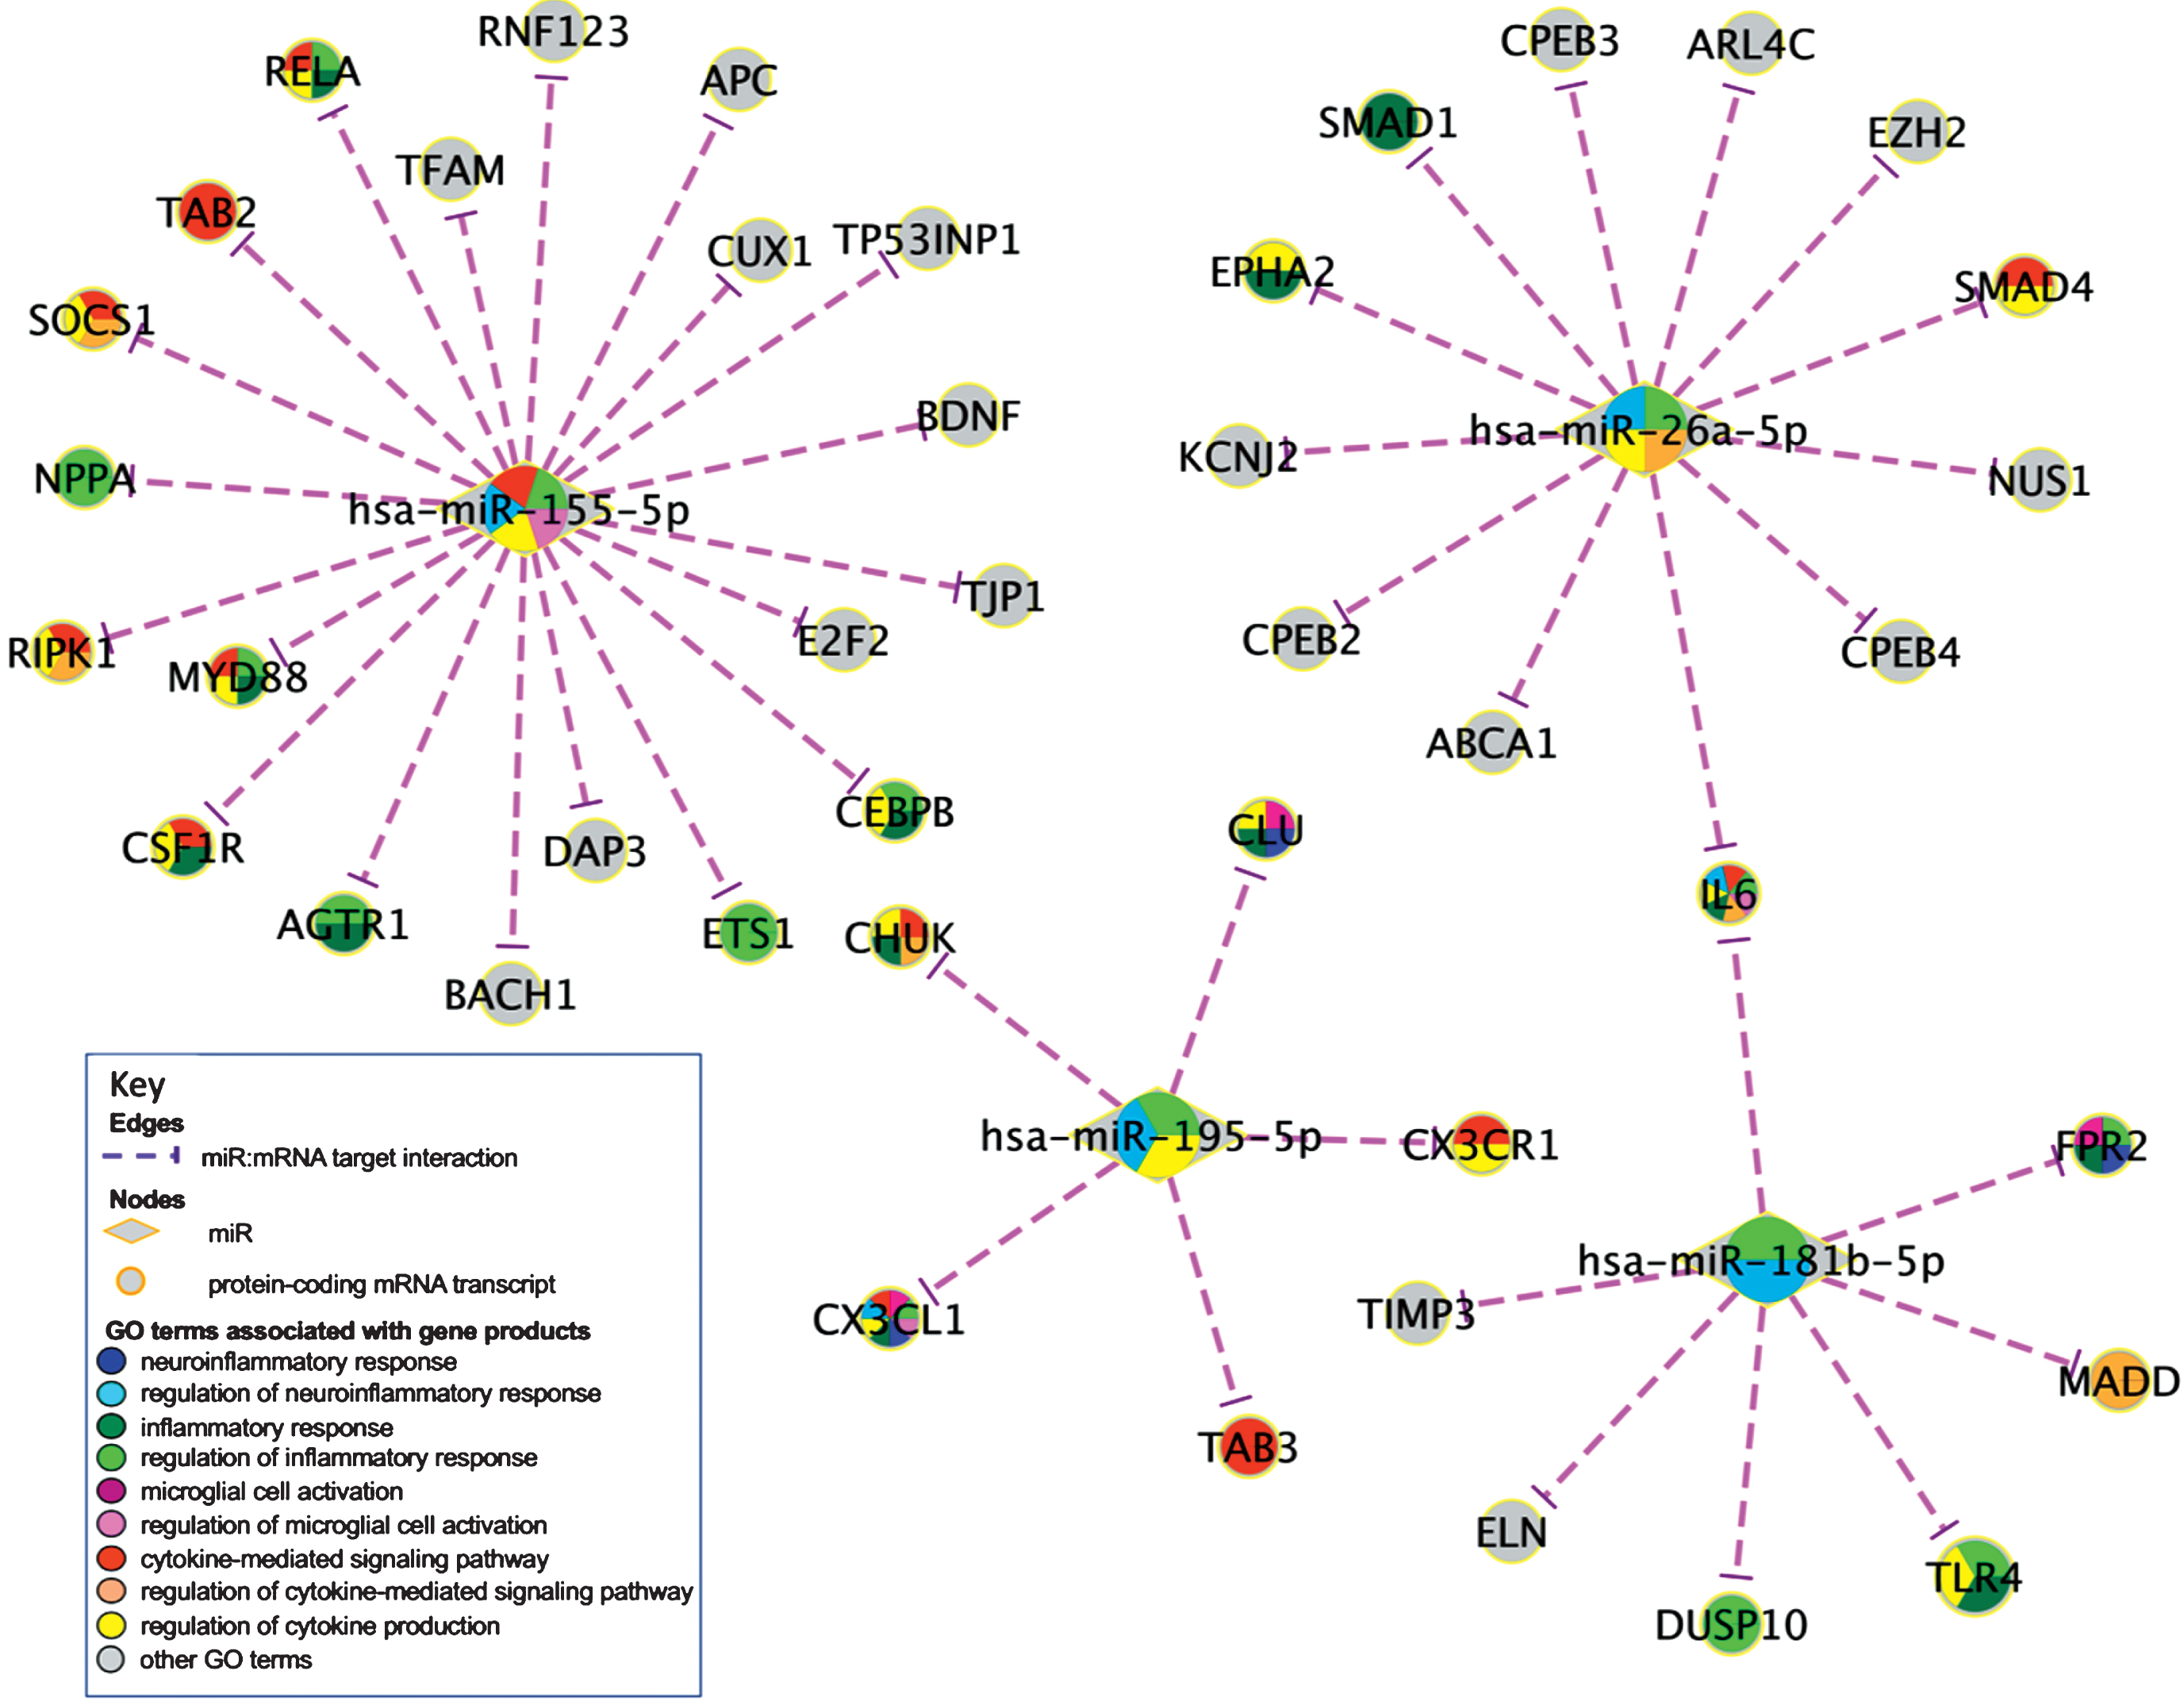 MiR-centered miR-target molecular interaction sub-network constructed by selecting four miRs enriched for ‘regulation of neuroinflammatory response’ and their direct targets. The sub-network was constructed in Cytoscape [73]. BiNGO [38] results (Supplementary Figure 2 and Supplementary Table 10) were used to identify relevant nodes and the first neighbors of the selected nodes. The four hub nodes represent miRs. The hub nodes are linked to the target nodes by the dashed edges, which represent experimentally demonstrated associations between miRs and their targets shown as nodes labelled with the HGNC-approved gene symbols. The purple cap at the end of each edge faces the target of miR silencing. The BiNGO enrichment analysis had been performed on the original large network of 415 nodes, shown in Supplementary Figure 2 and Supplementary Table 9. Key BiNGO analysis results are shown Table 5; all of the analysis results are provided in Supplementary Table 10. The background colors of the nodes’ fragments correspond to GO terms shown on the same background colors in the ‘Key to background colors’ text box.